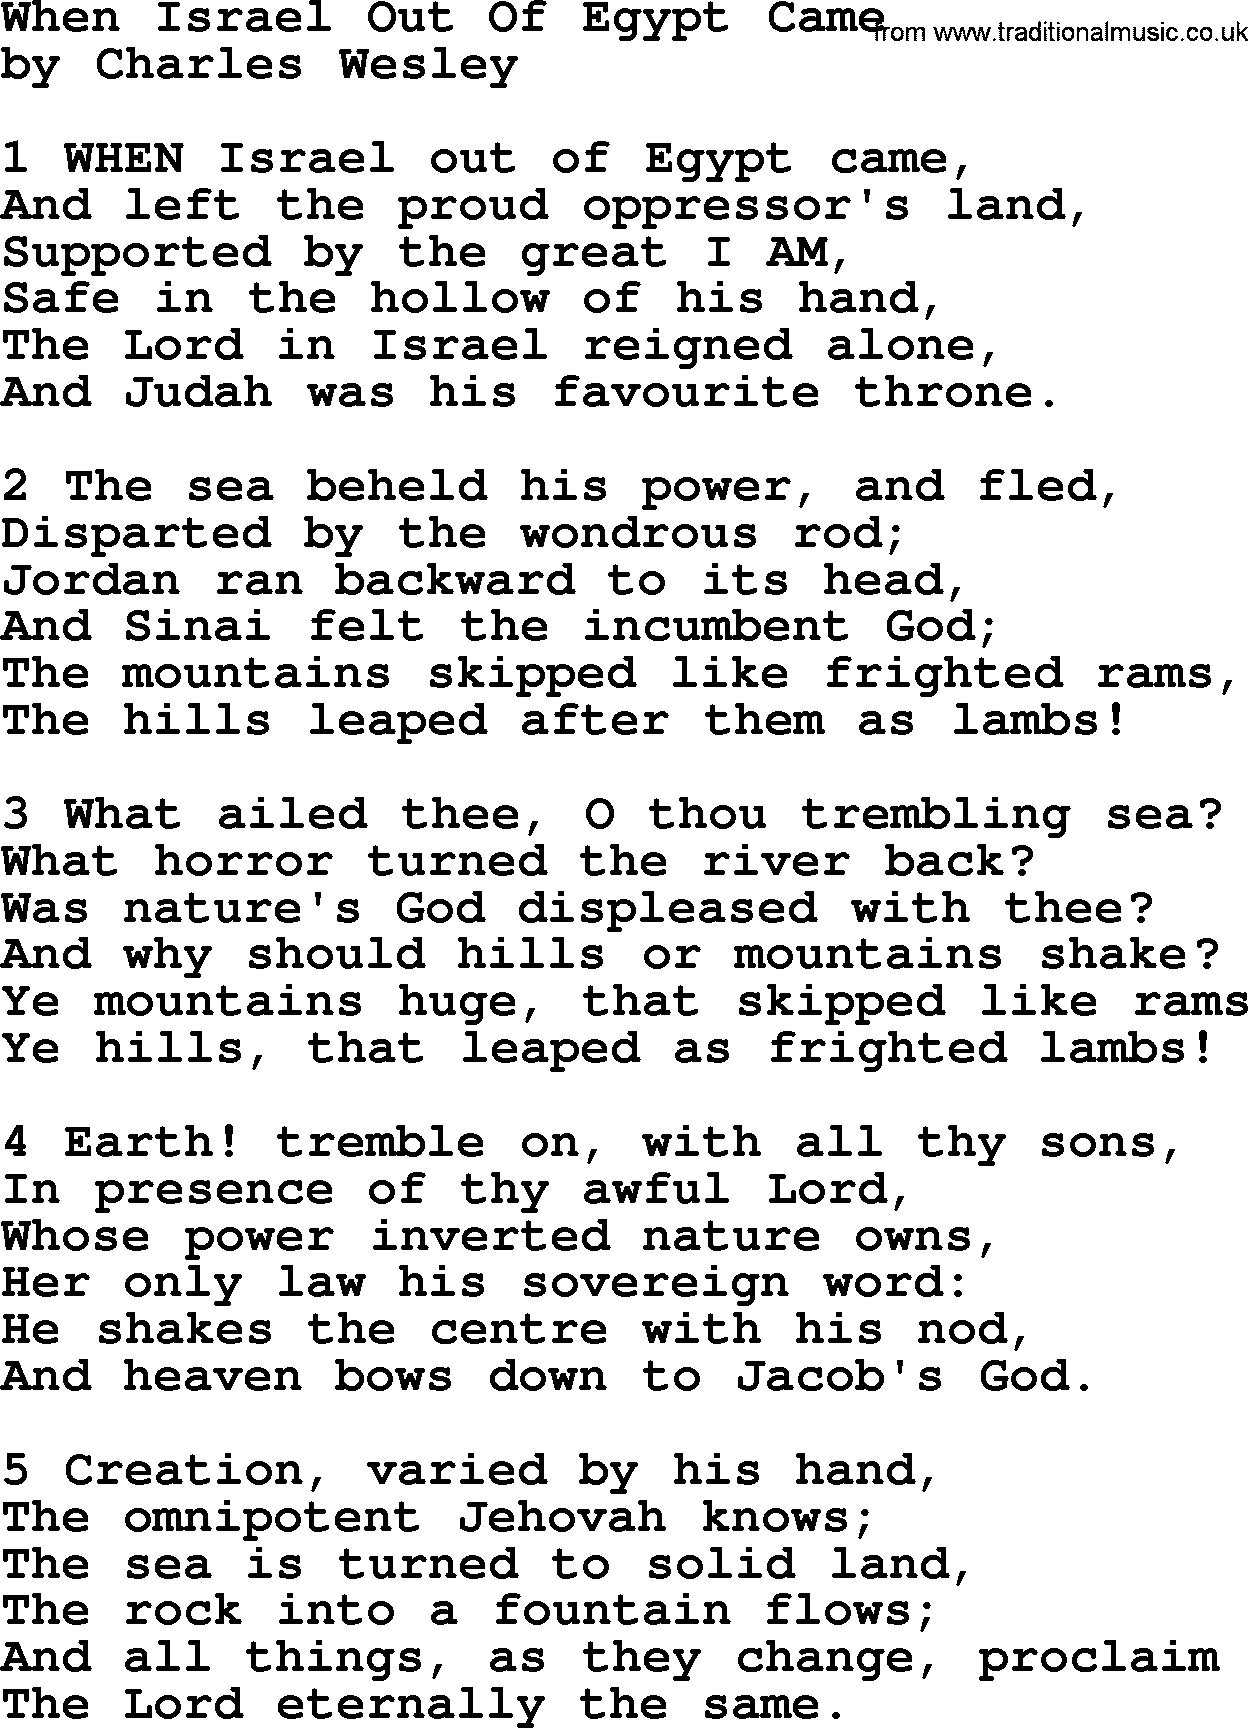 Charles Wesley hymn: When Israel Out Of Egypt Came, lyrics